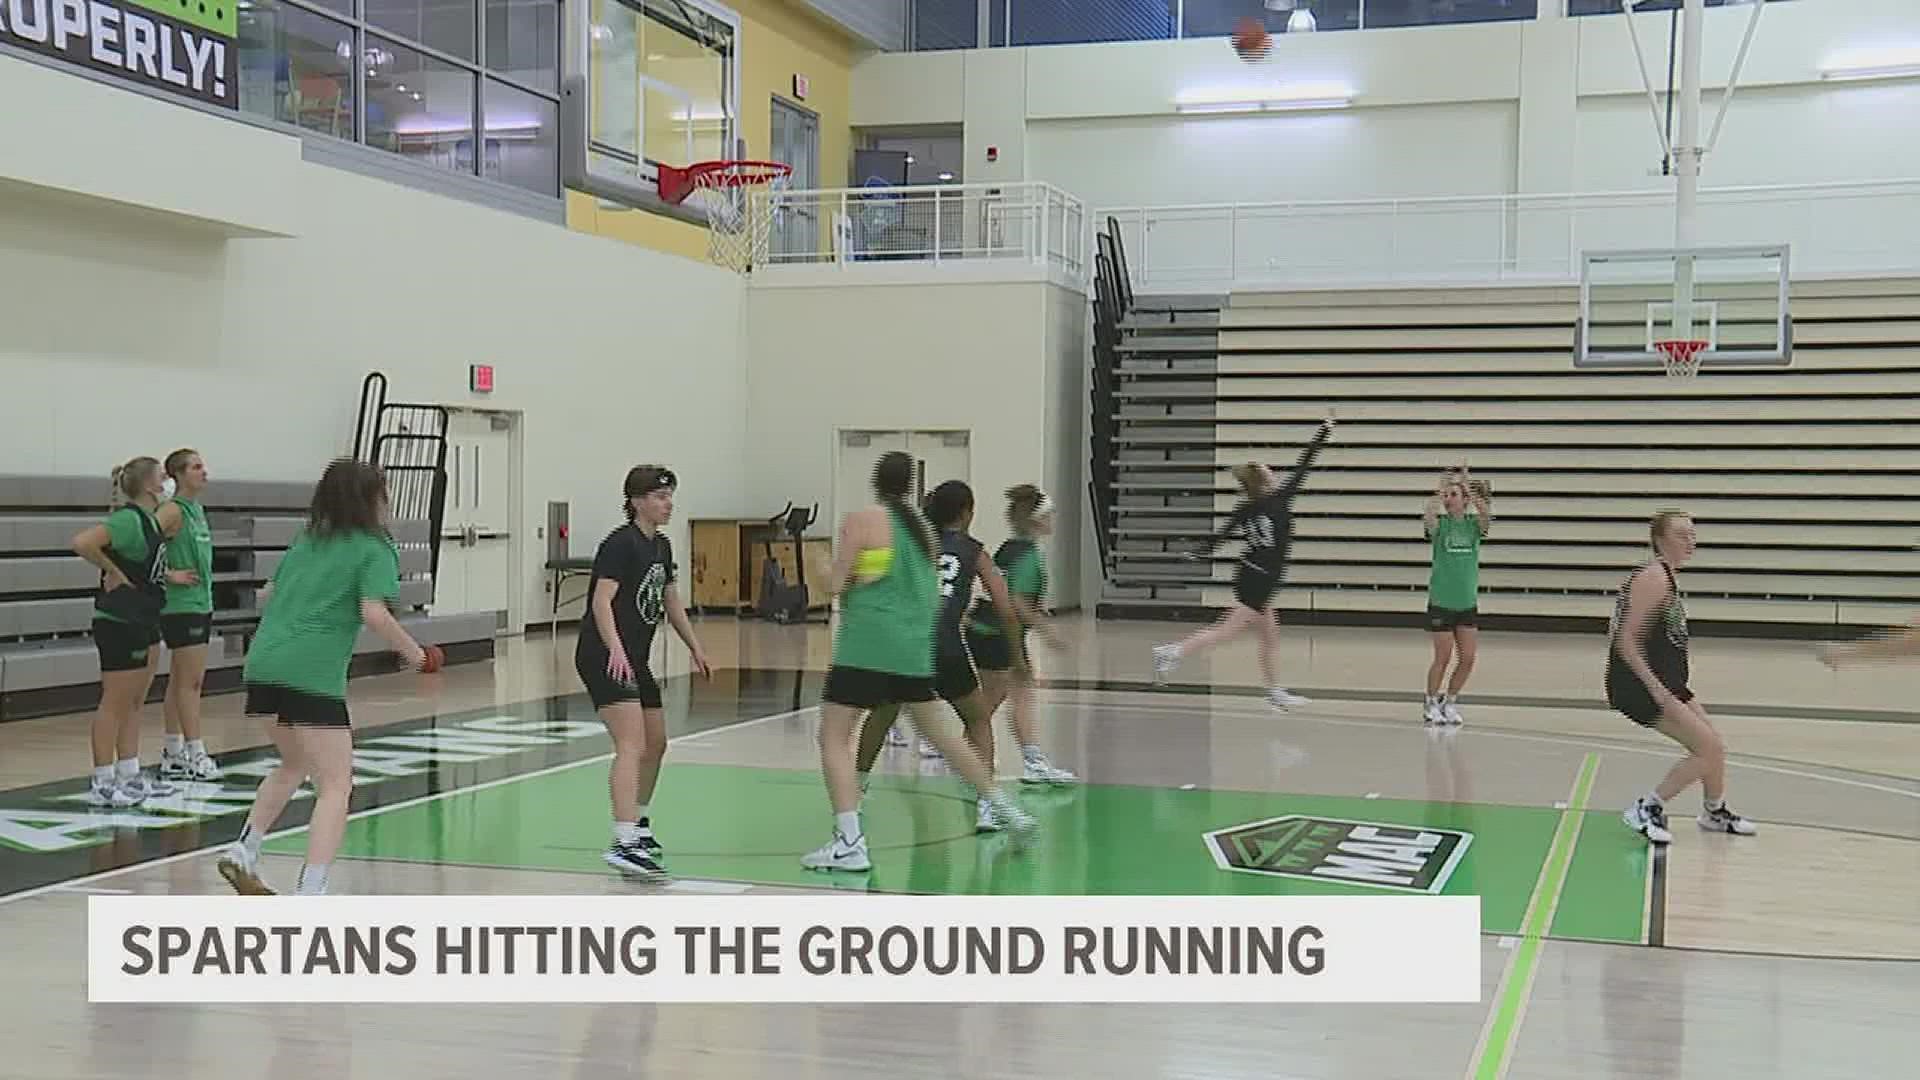 York College Women's basketball team is dominating their new league